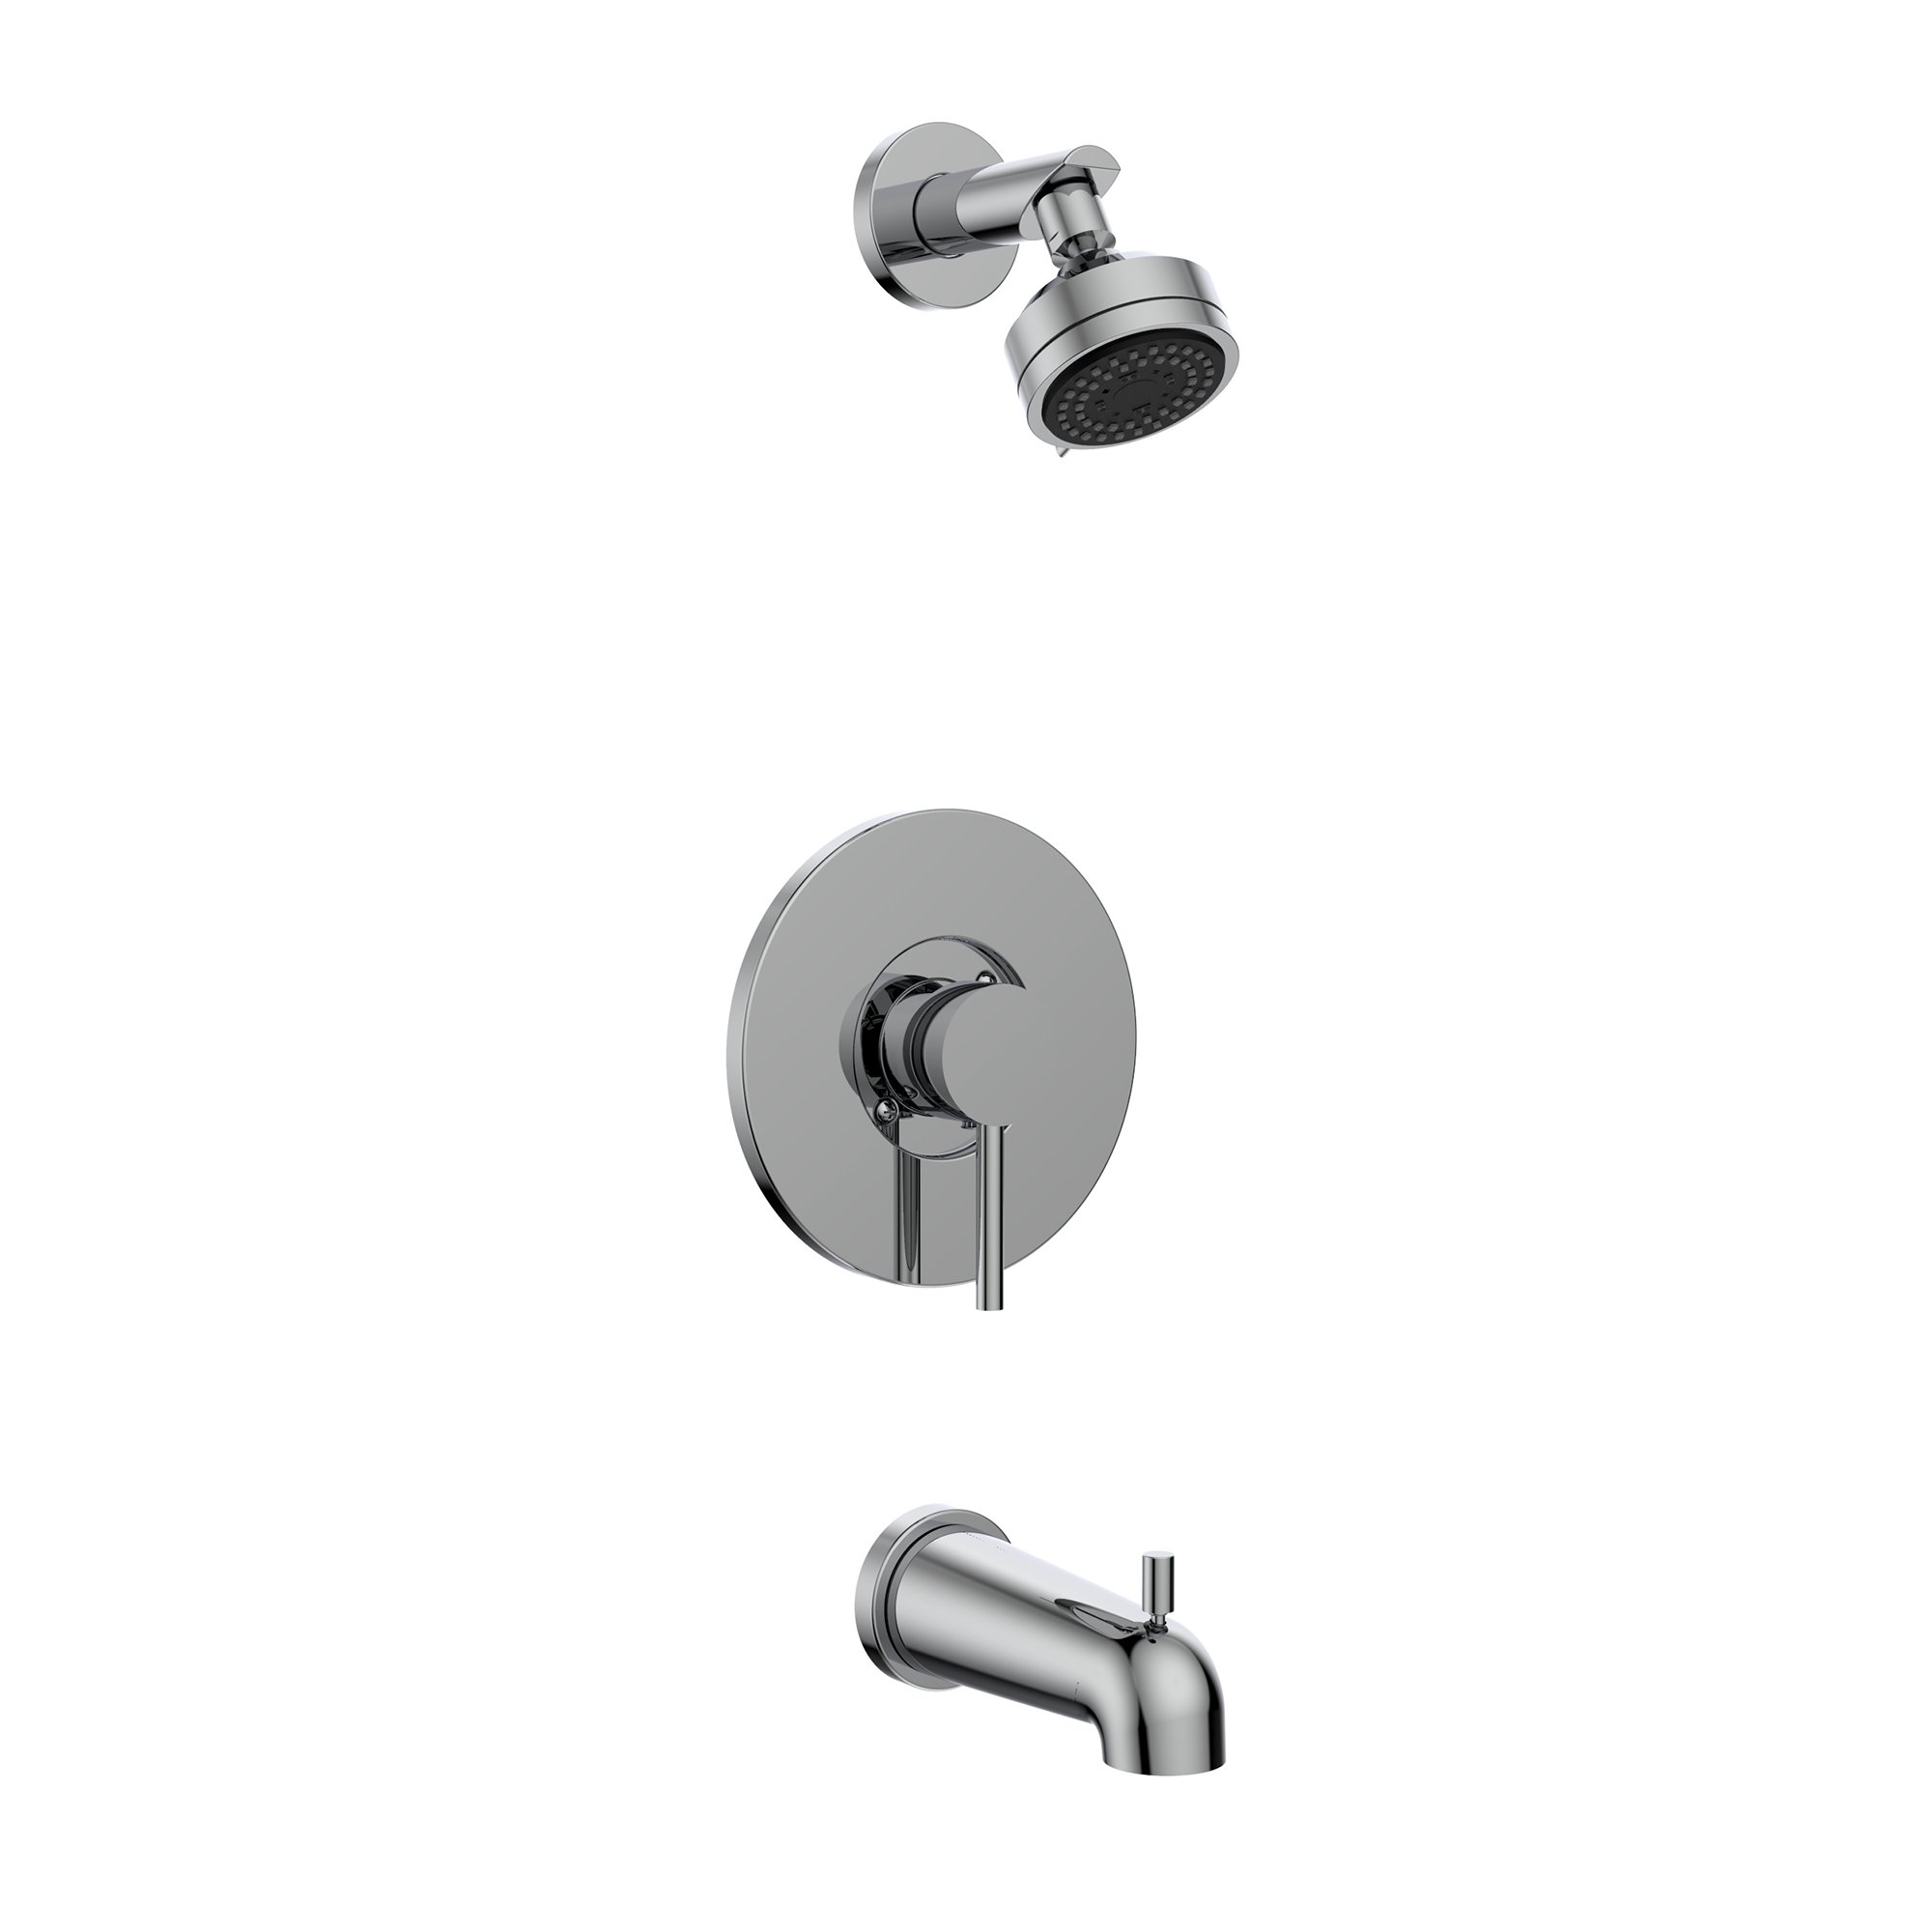 Del90ccp 7.68 X 7.72 X 6.69 In. Bathtub & Shower Faucet With 1 Handle, Polished Chrome